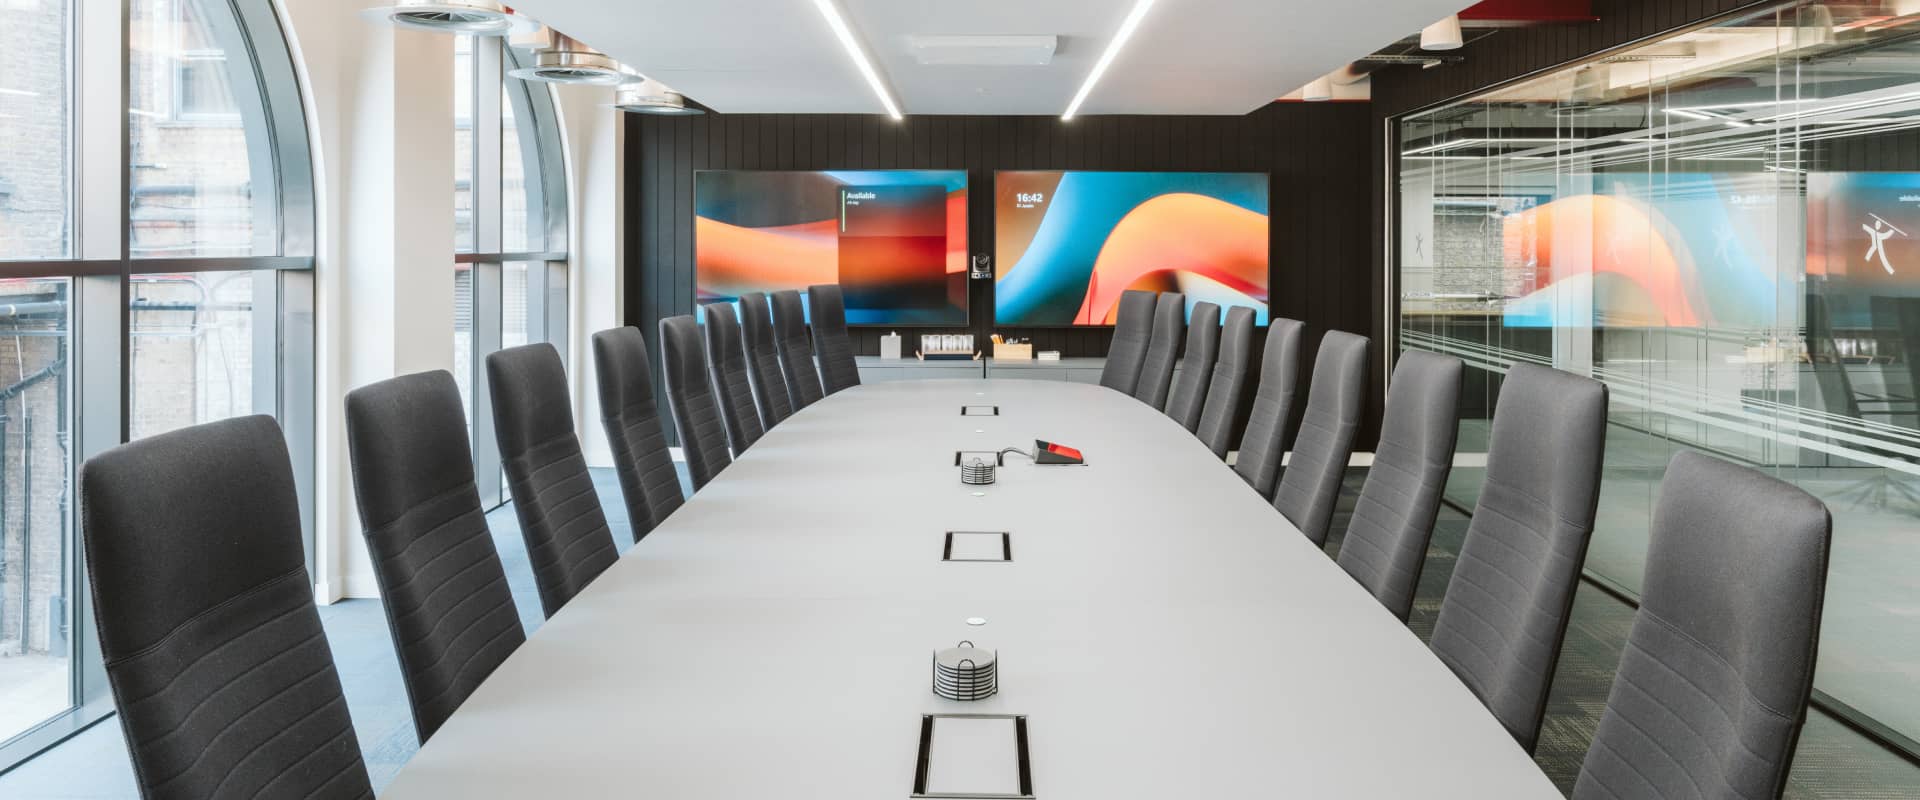 premium and modern conference room and office fit out for Javelin London by Cleo workspace design & build